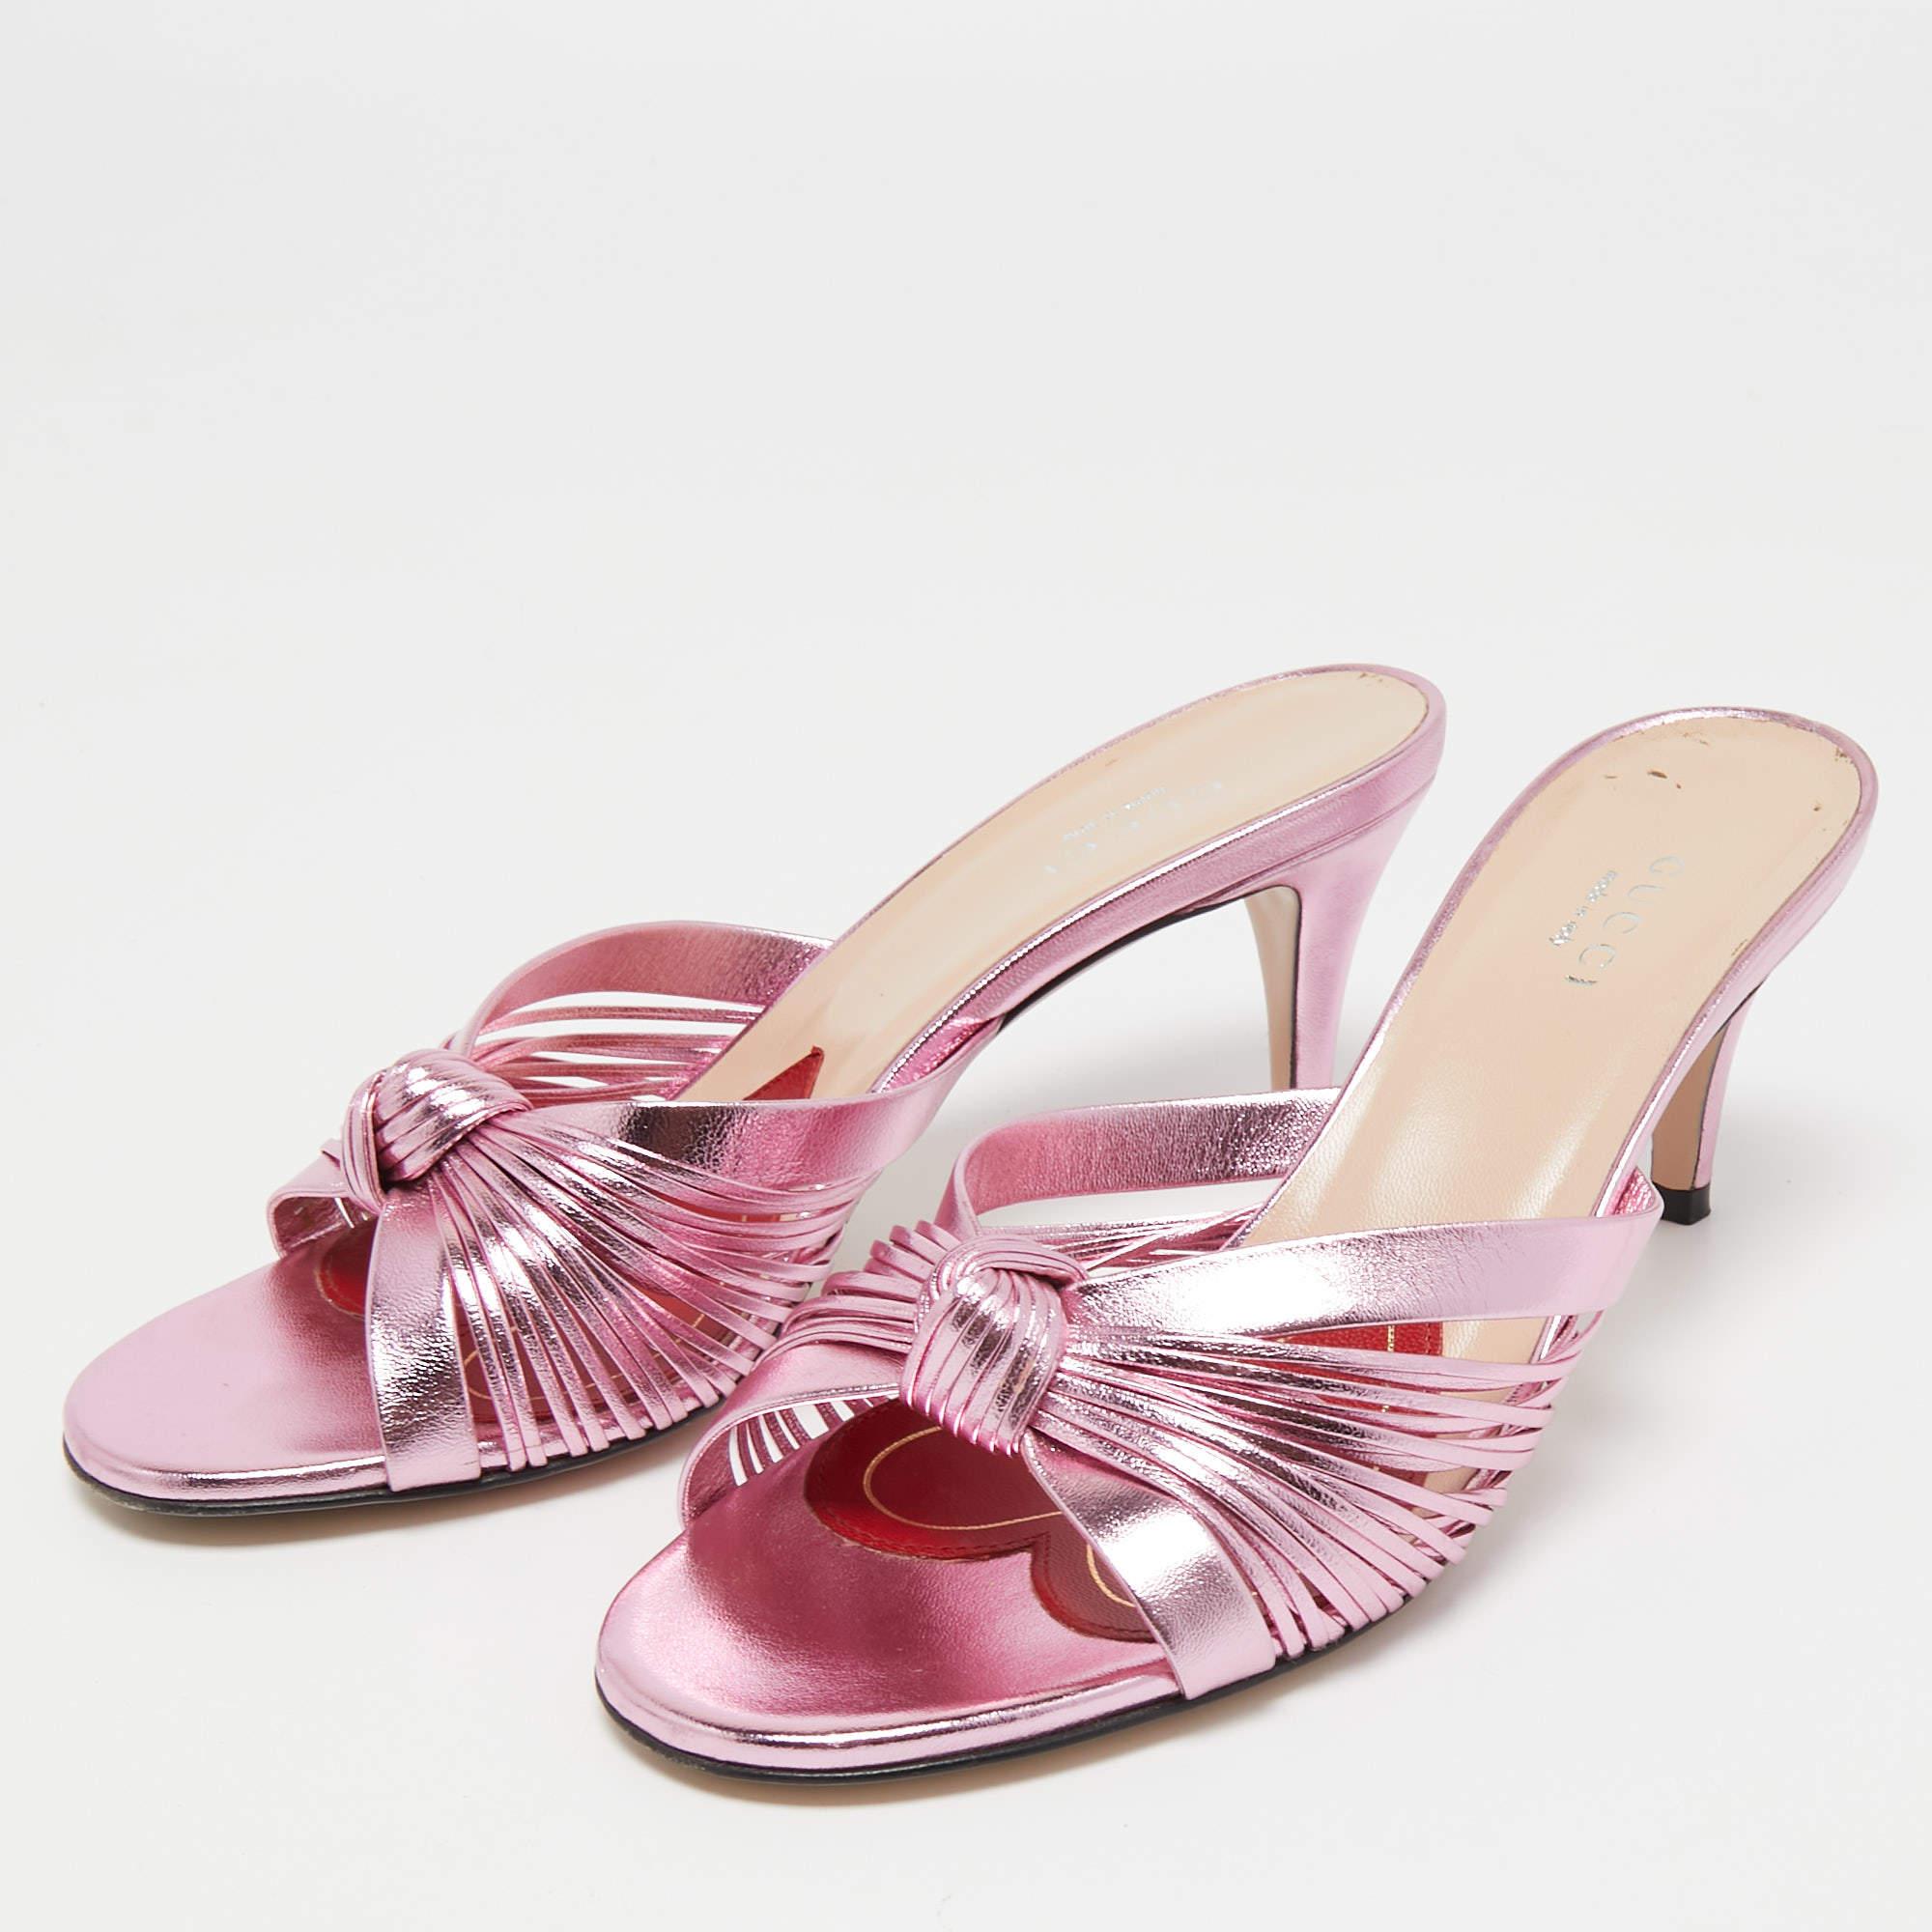 Gucci Metallic Pink Leather Knotted Slide Sandals Size 36.5 In Excellent Condition For Sale In Dubai, Al Qouz 2